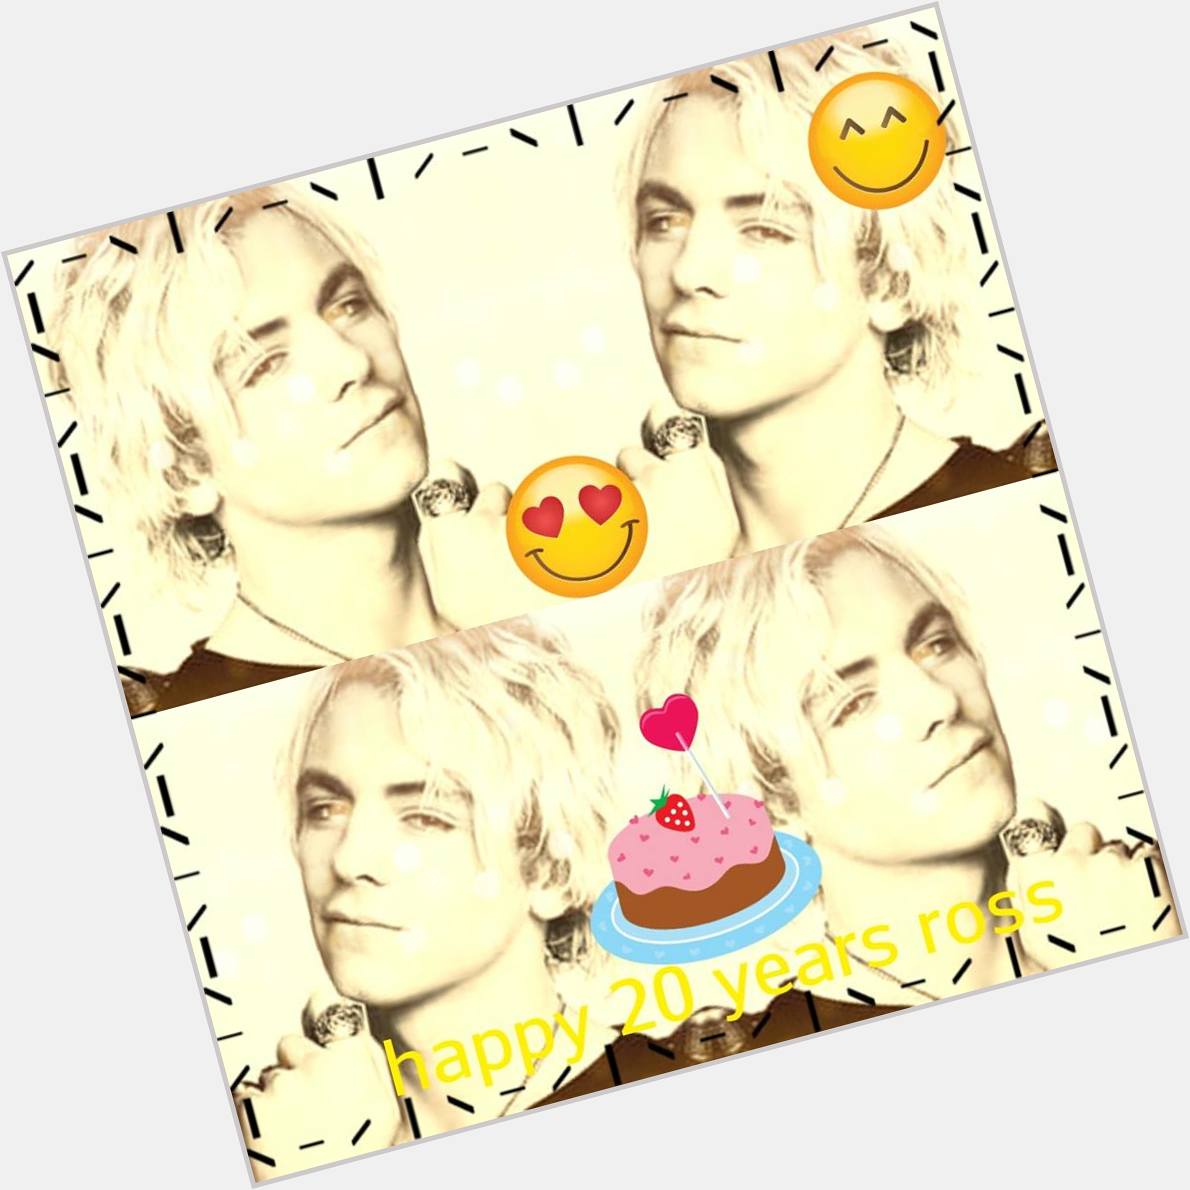  Ross Lynch happy birthday i love you i love you \re everything to me.... 